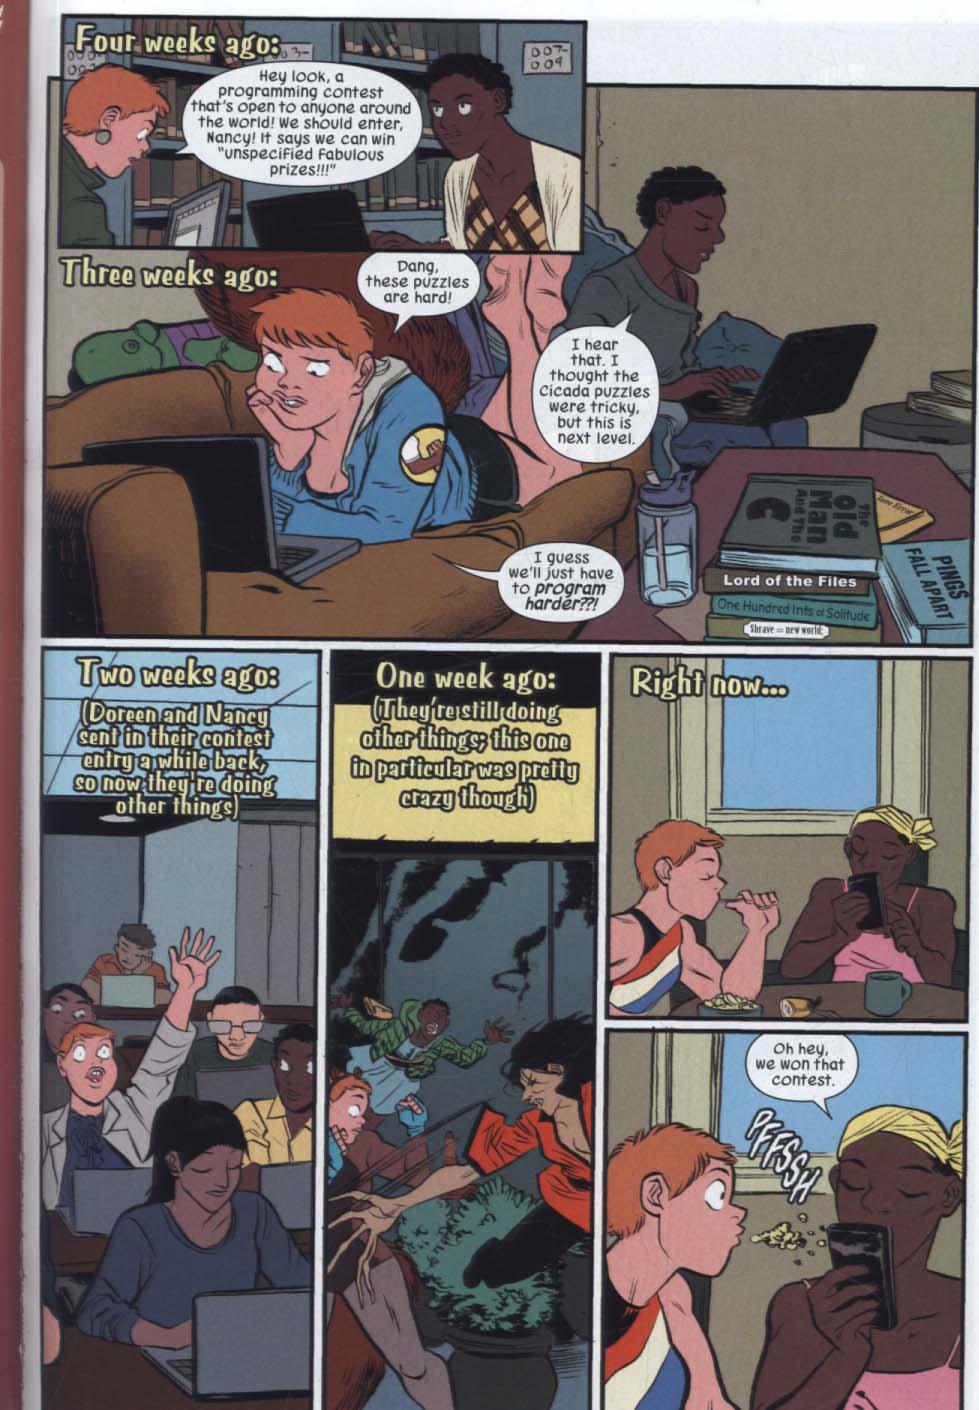 Unbeatable Squirrel Girl Vol. 7: I've Been Waiting For A Squ